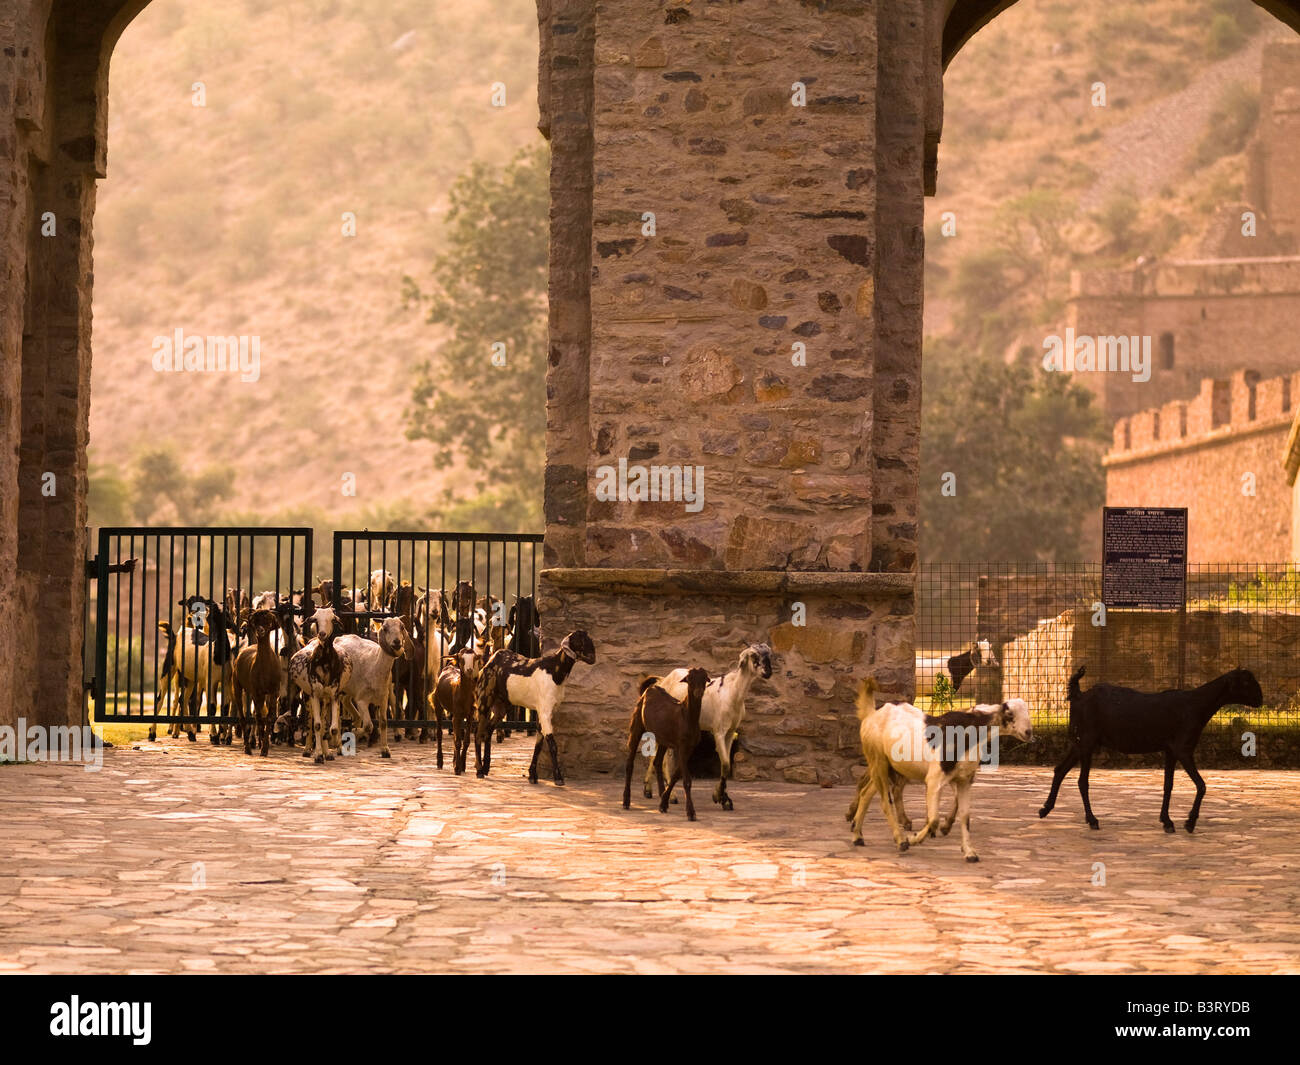 Goats in the abandoned city of Fatehpur, Rajasthan, India Stock Photo